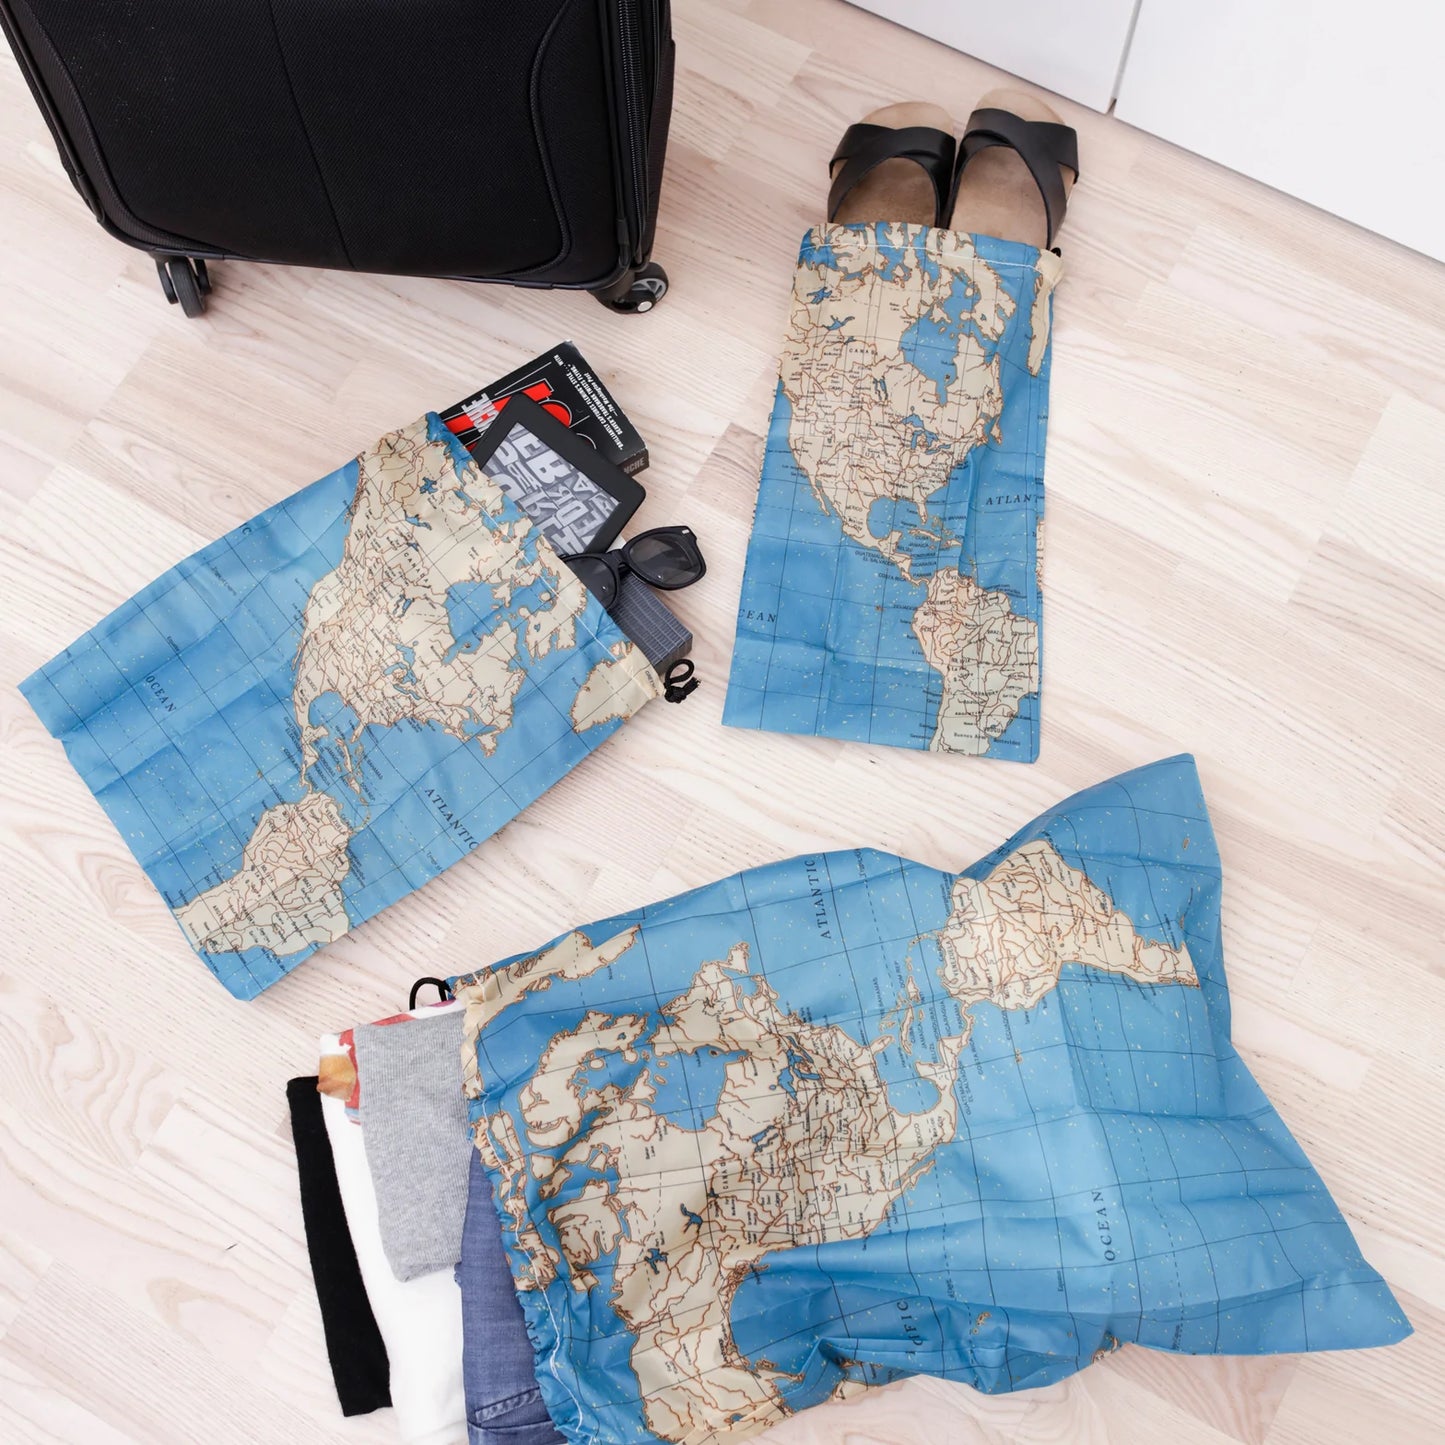 Travel Map Laundry Bags ( Set of 4 )